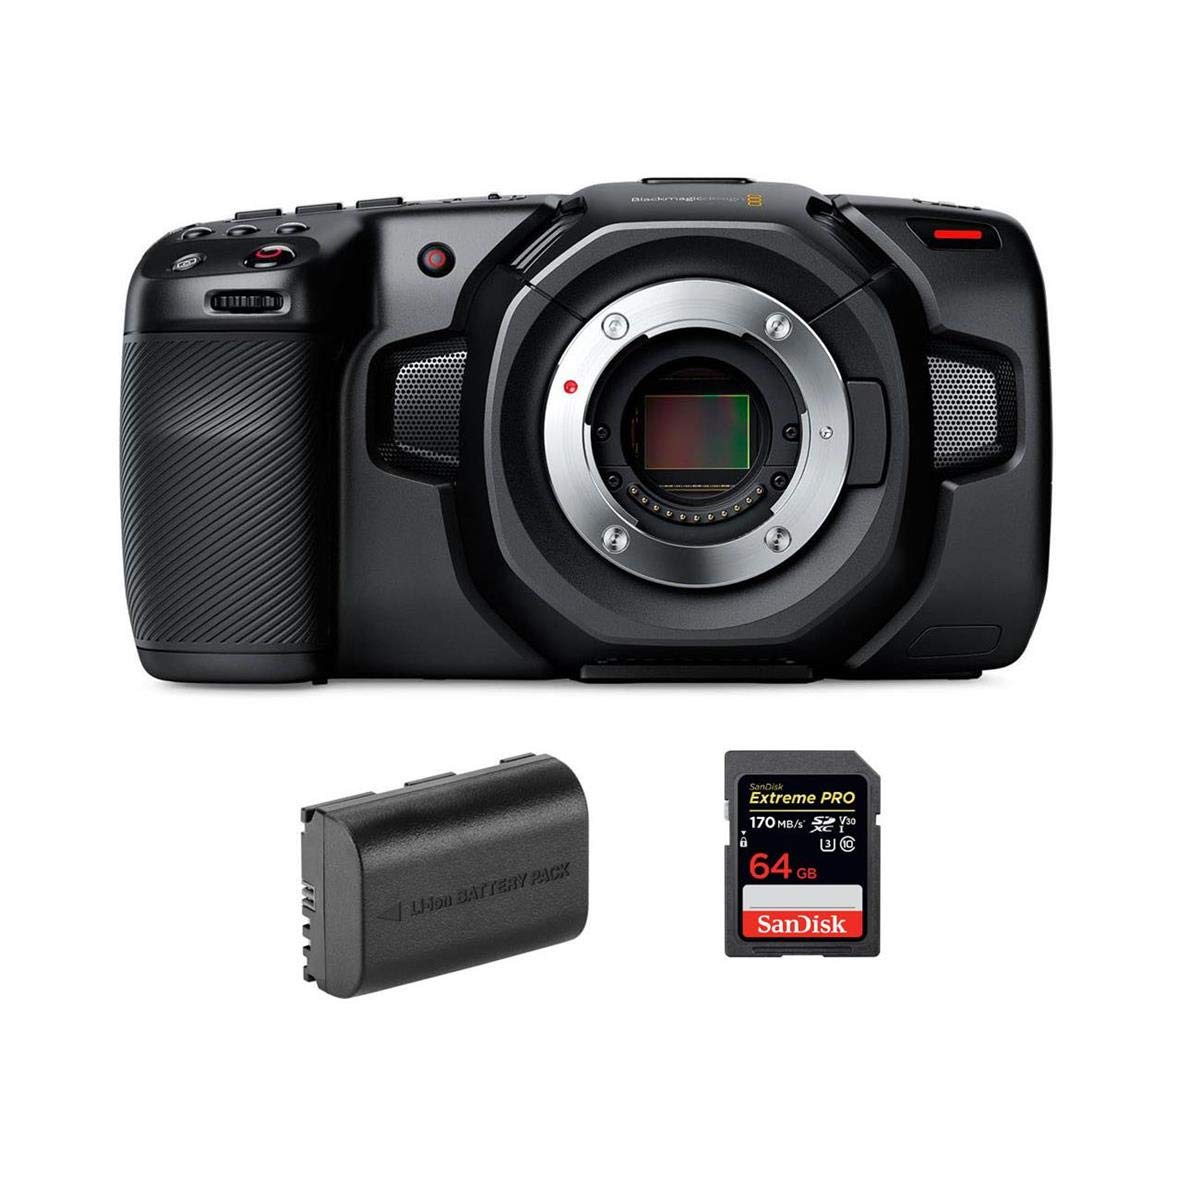 Blackmagic Design Pocket Cinema Camera 4K - Bundle with 64GB SDXC Memory Card, Green Extreme LP-E6N Rechargeable Lithium-Ion Battery Pack